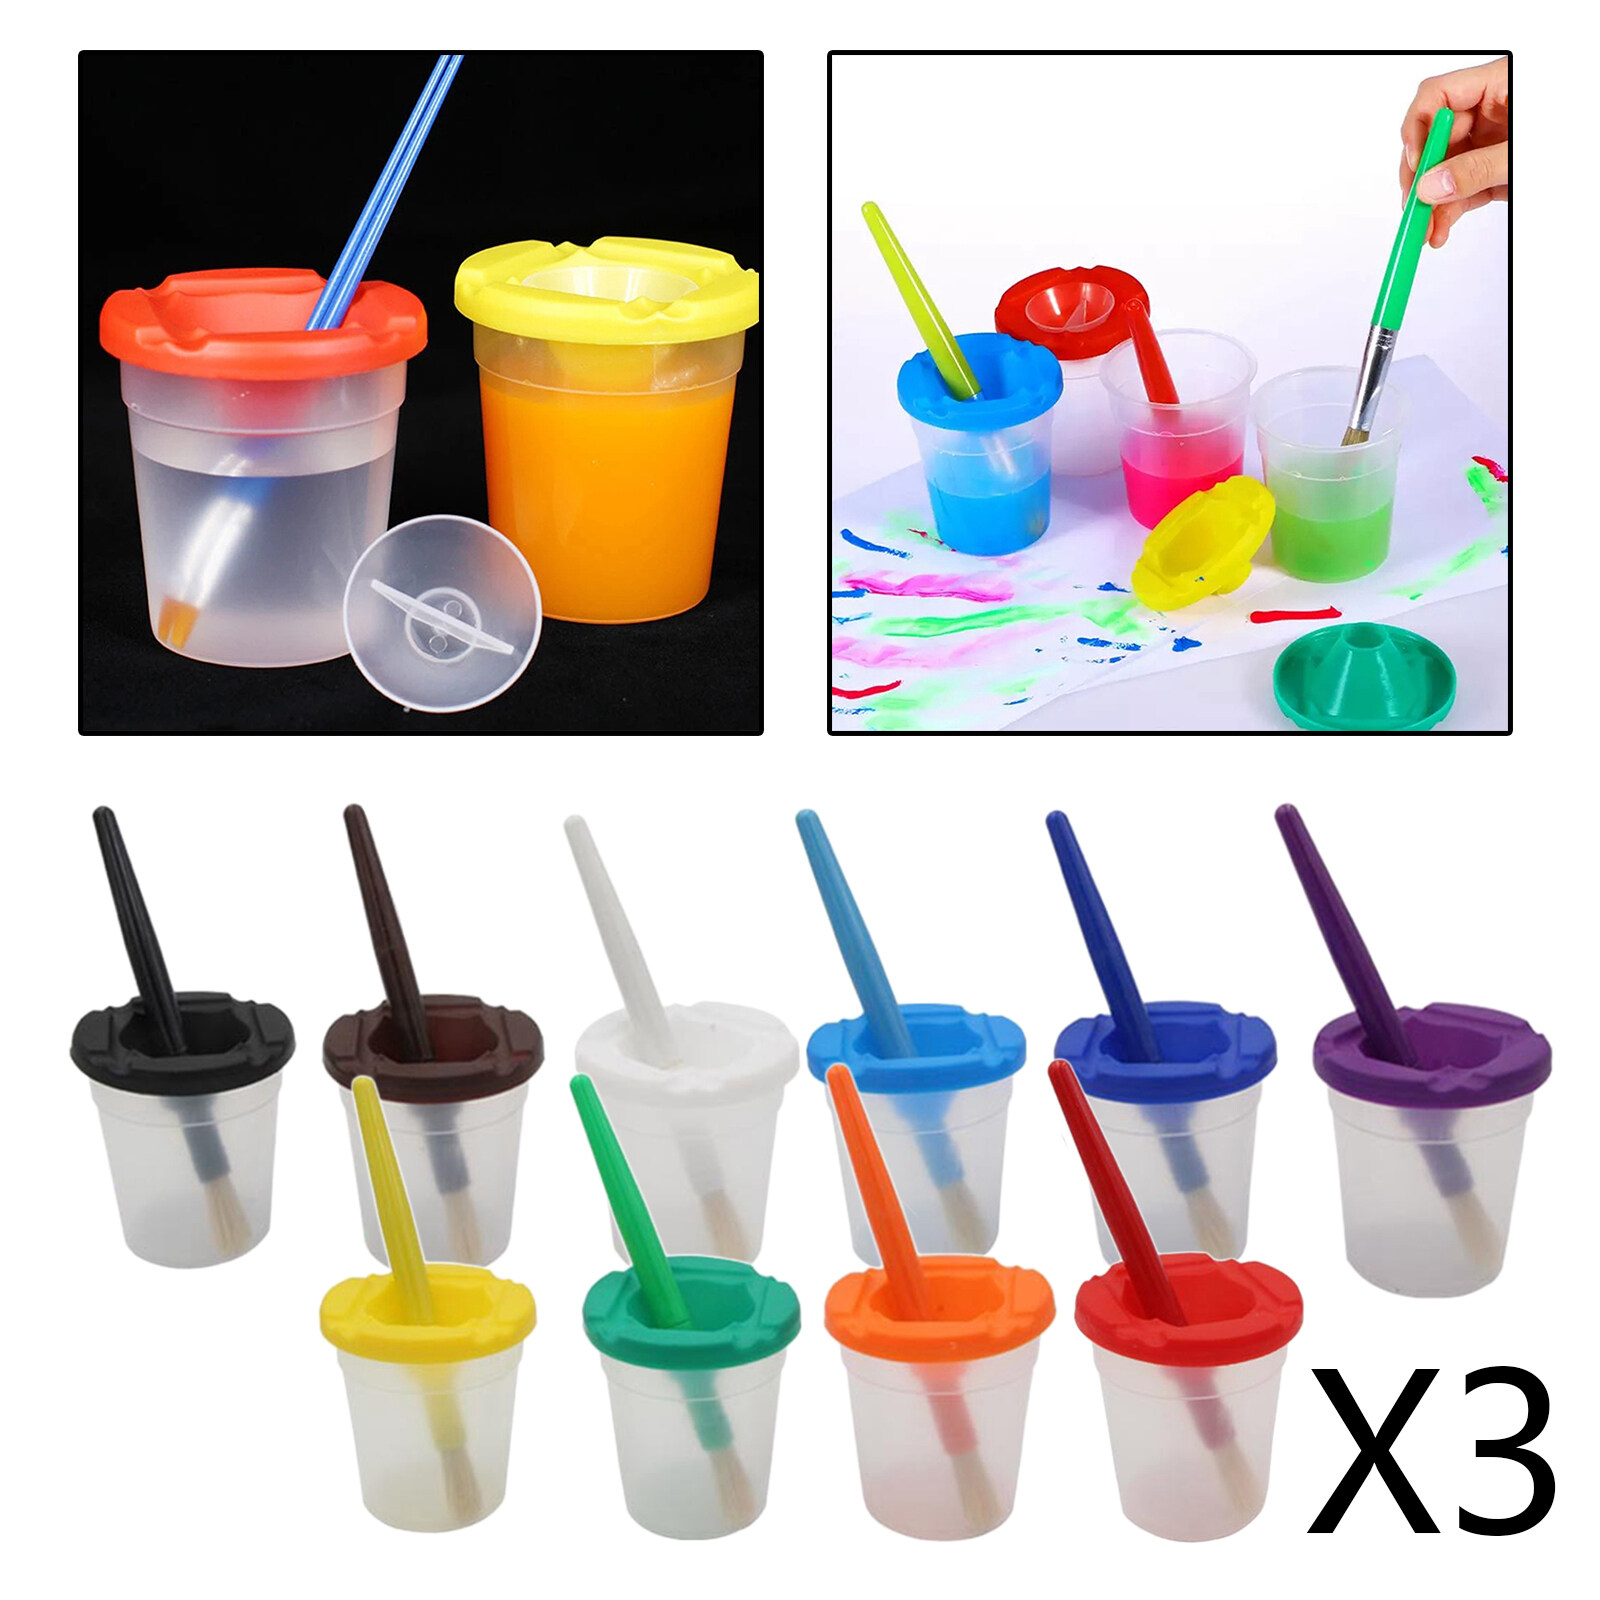 Baoblaze 30 Pcs Spill Proof Paint Cups Painting Tools for Kids Children